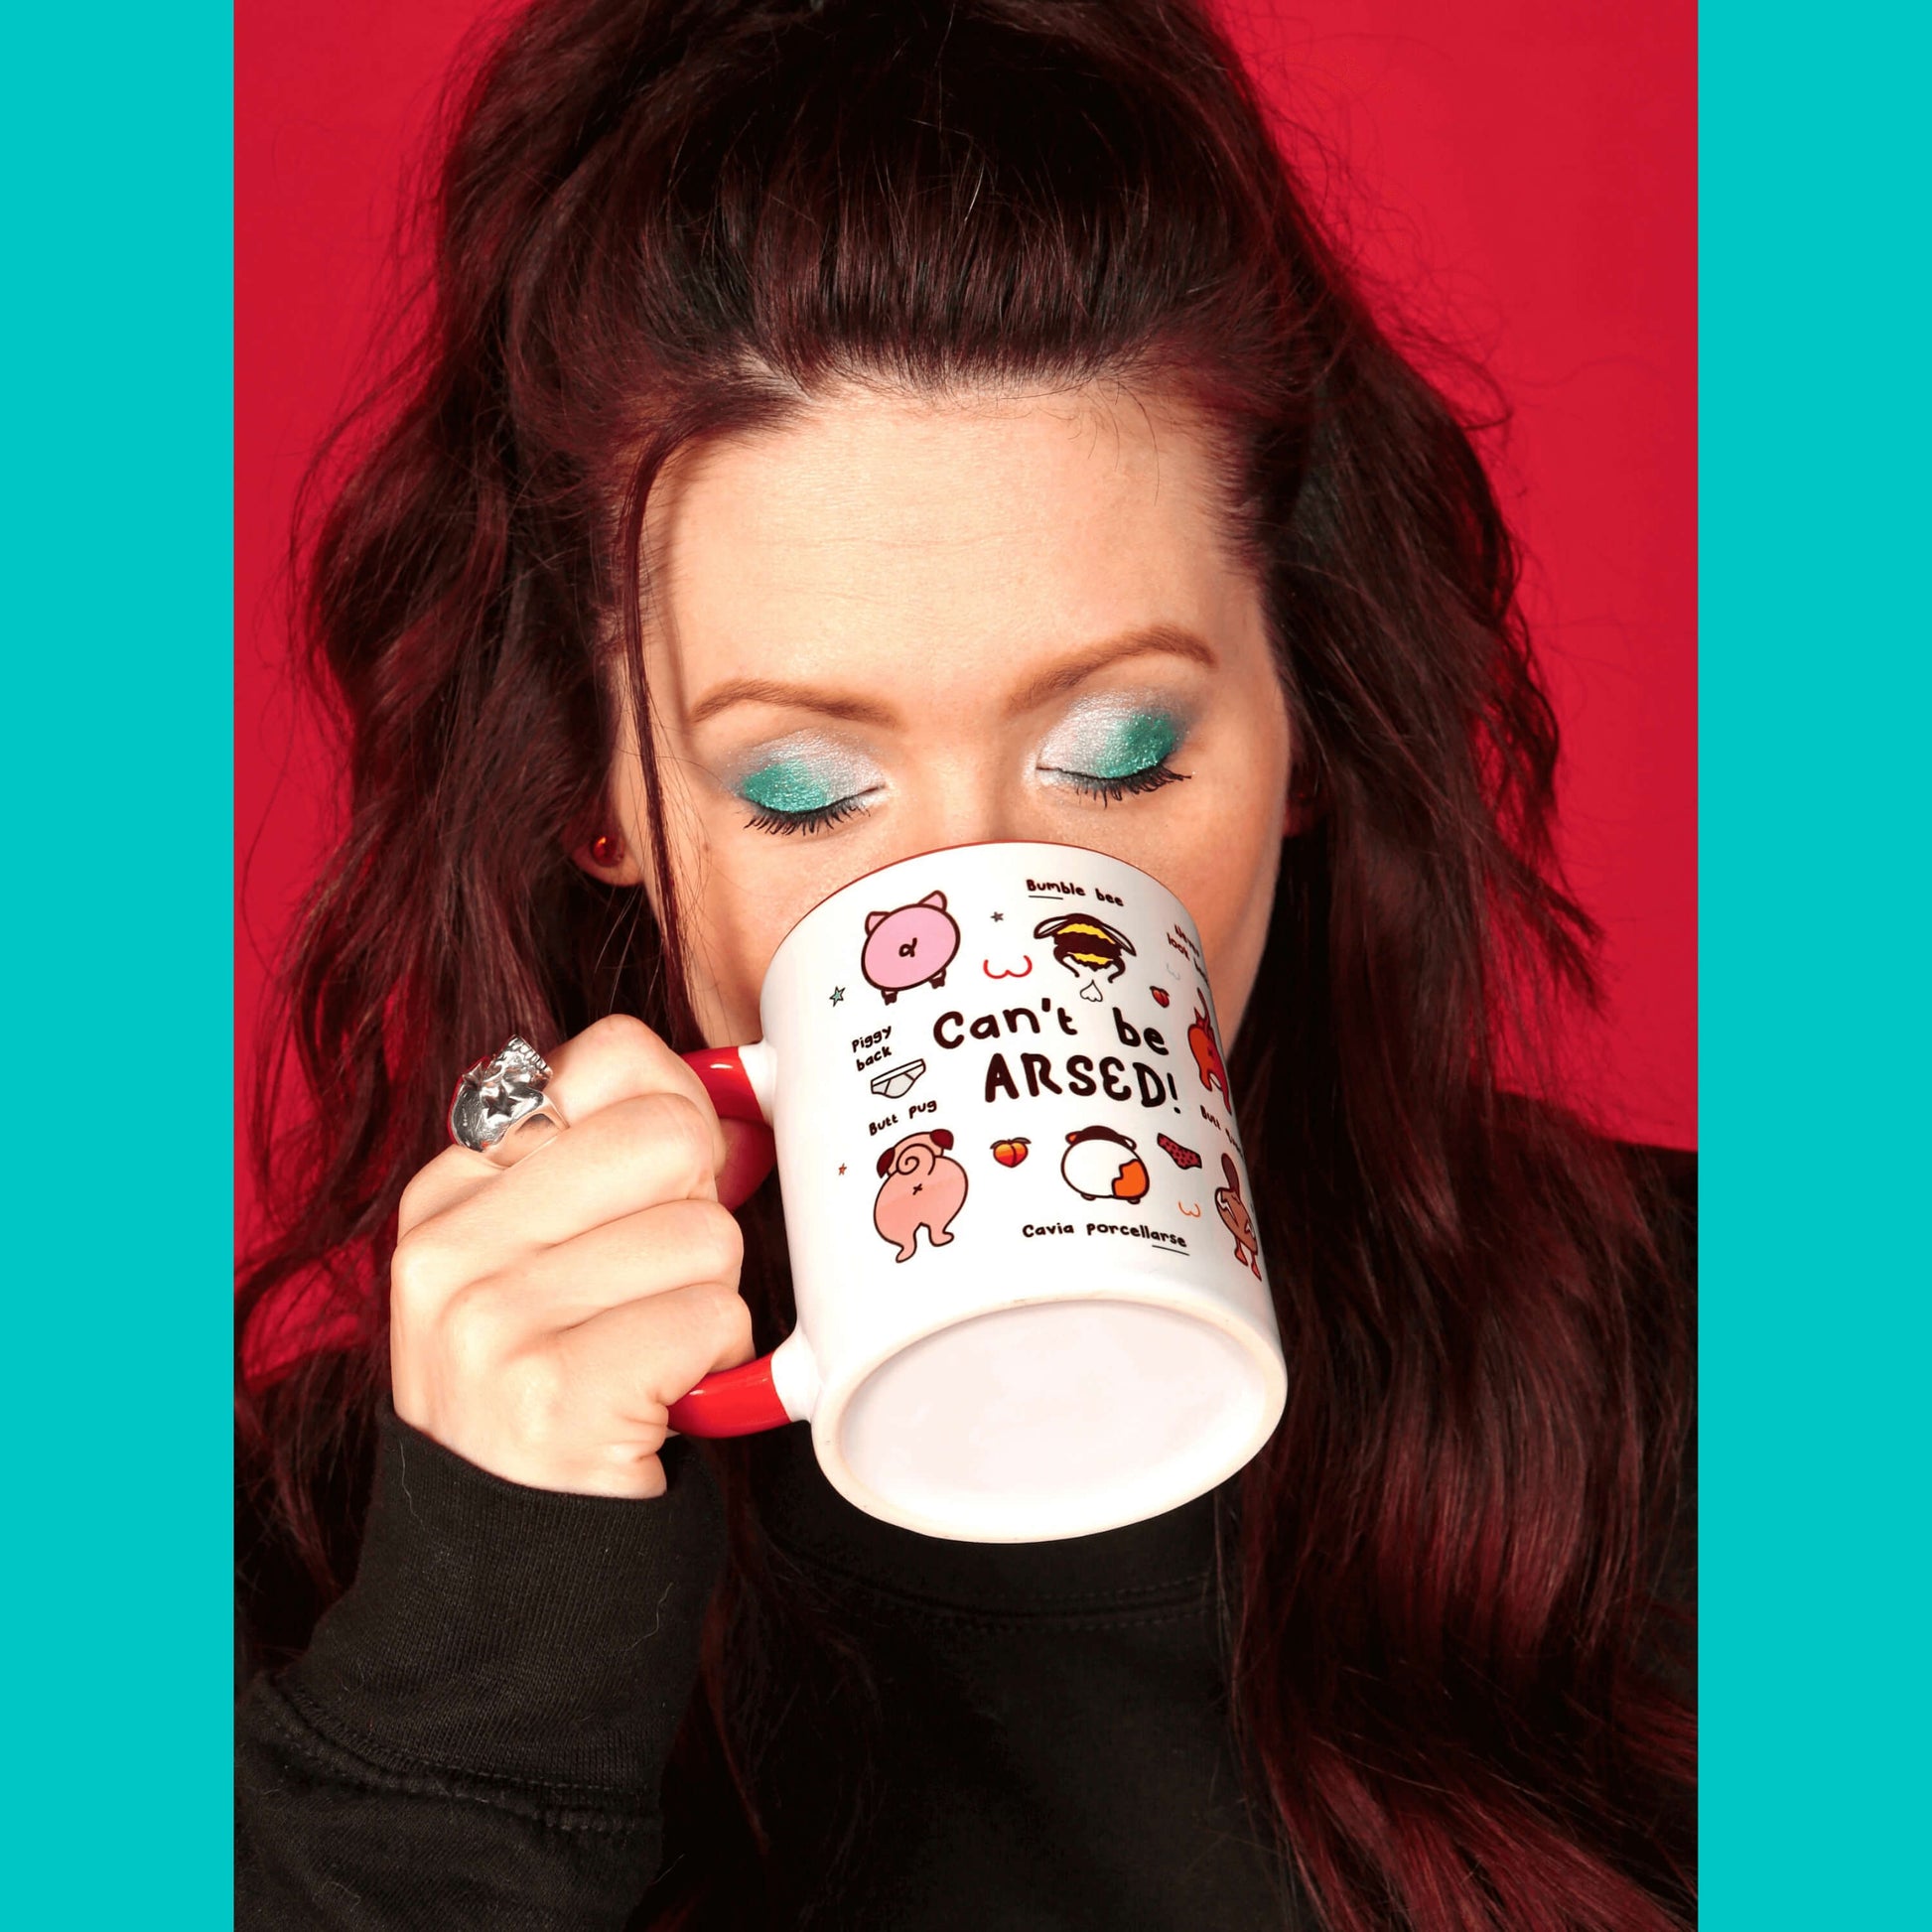 The Can't Be Arsed Mug being held up by Nikky Box to her mouth. She has brown hair and blue eye makeup wearing the invisible illness black sweater. The white mug with a red handle and inside features various animal bums with underwear, chest outlines, peaches and multicoloured stars. The mug is facing right which shows pig - piggy back, bumble bee - bum ble bee, pug - butt pug, guinea pig - cavia porcellarse, duck - butt quack and cat - never look back, bums.